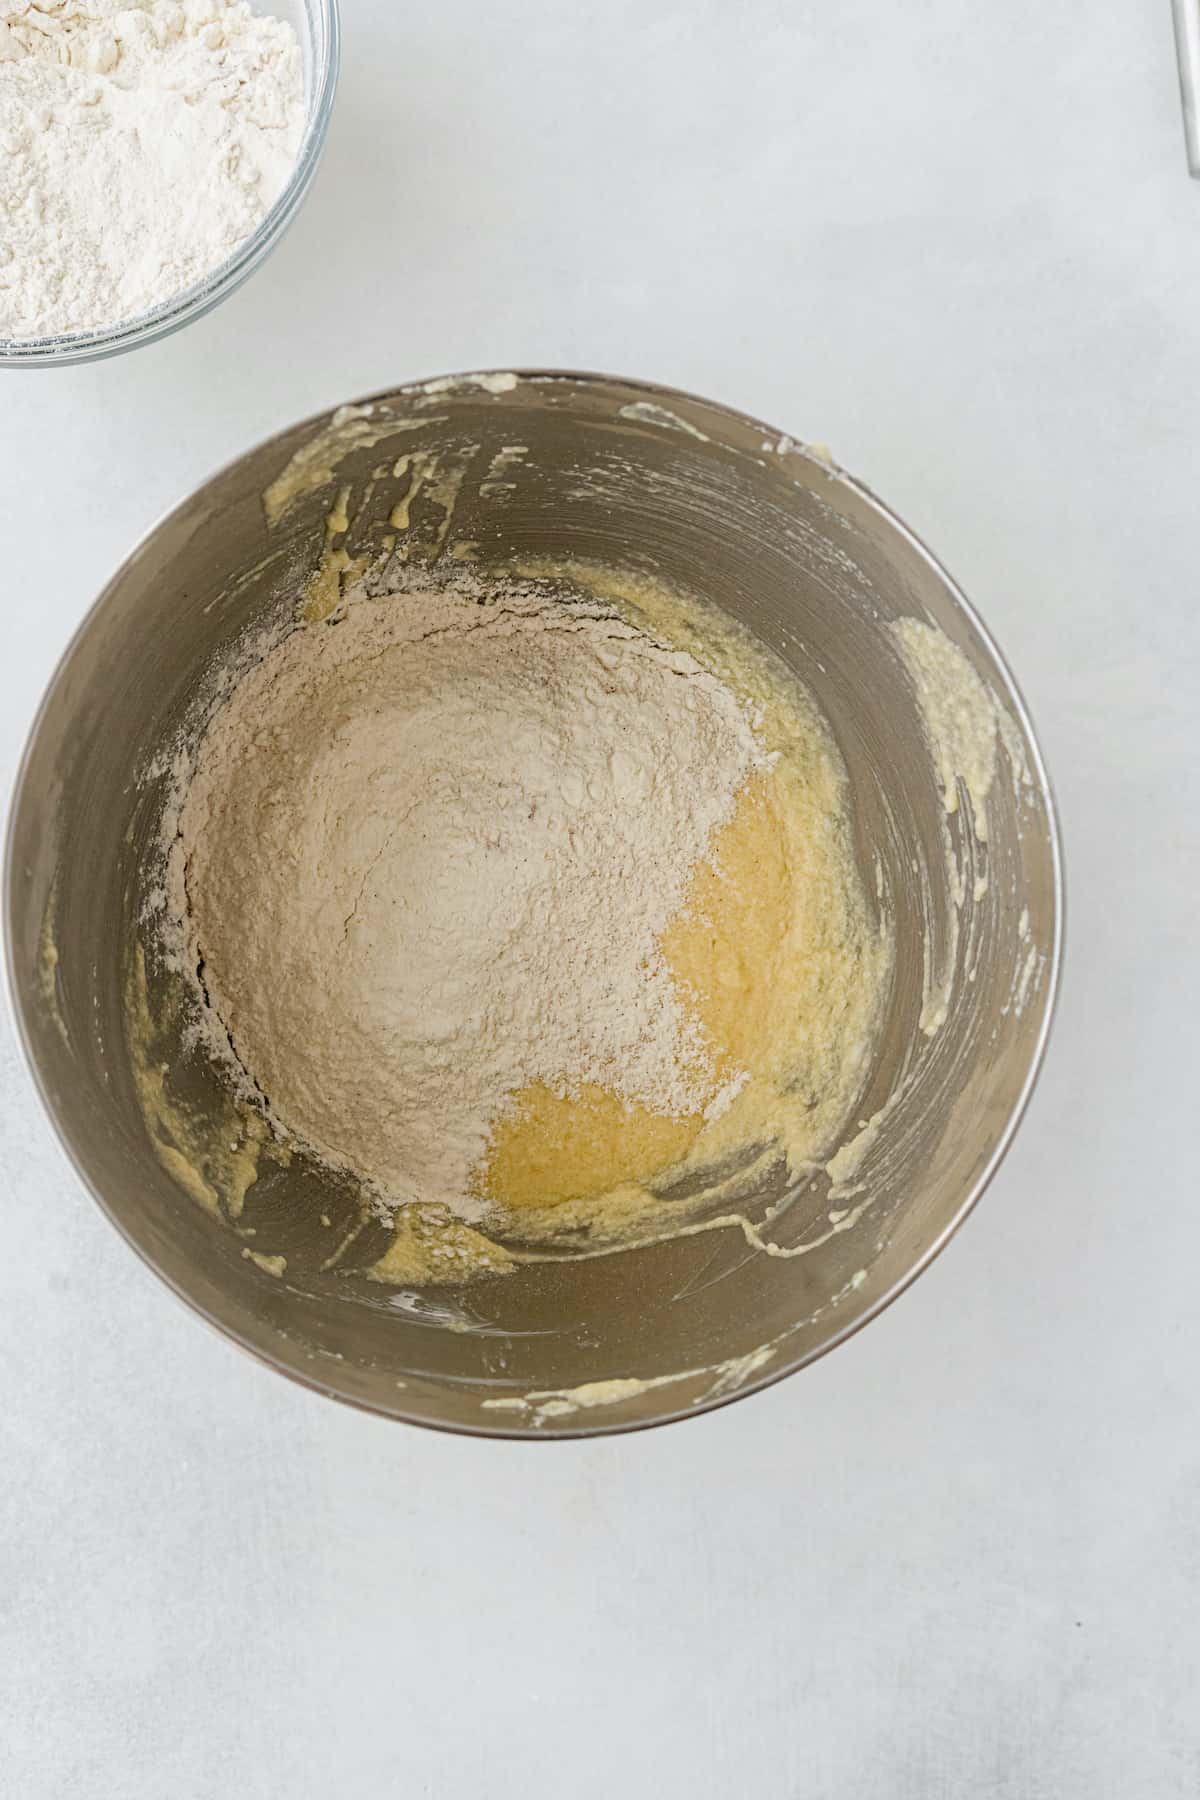 Flour and egg mixture in a stainless bowl.